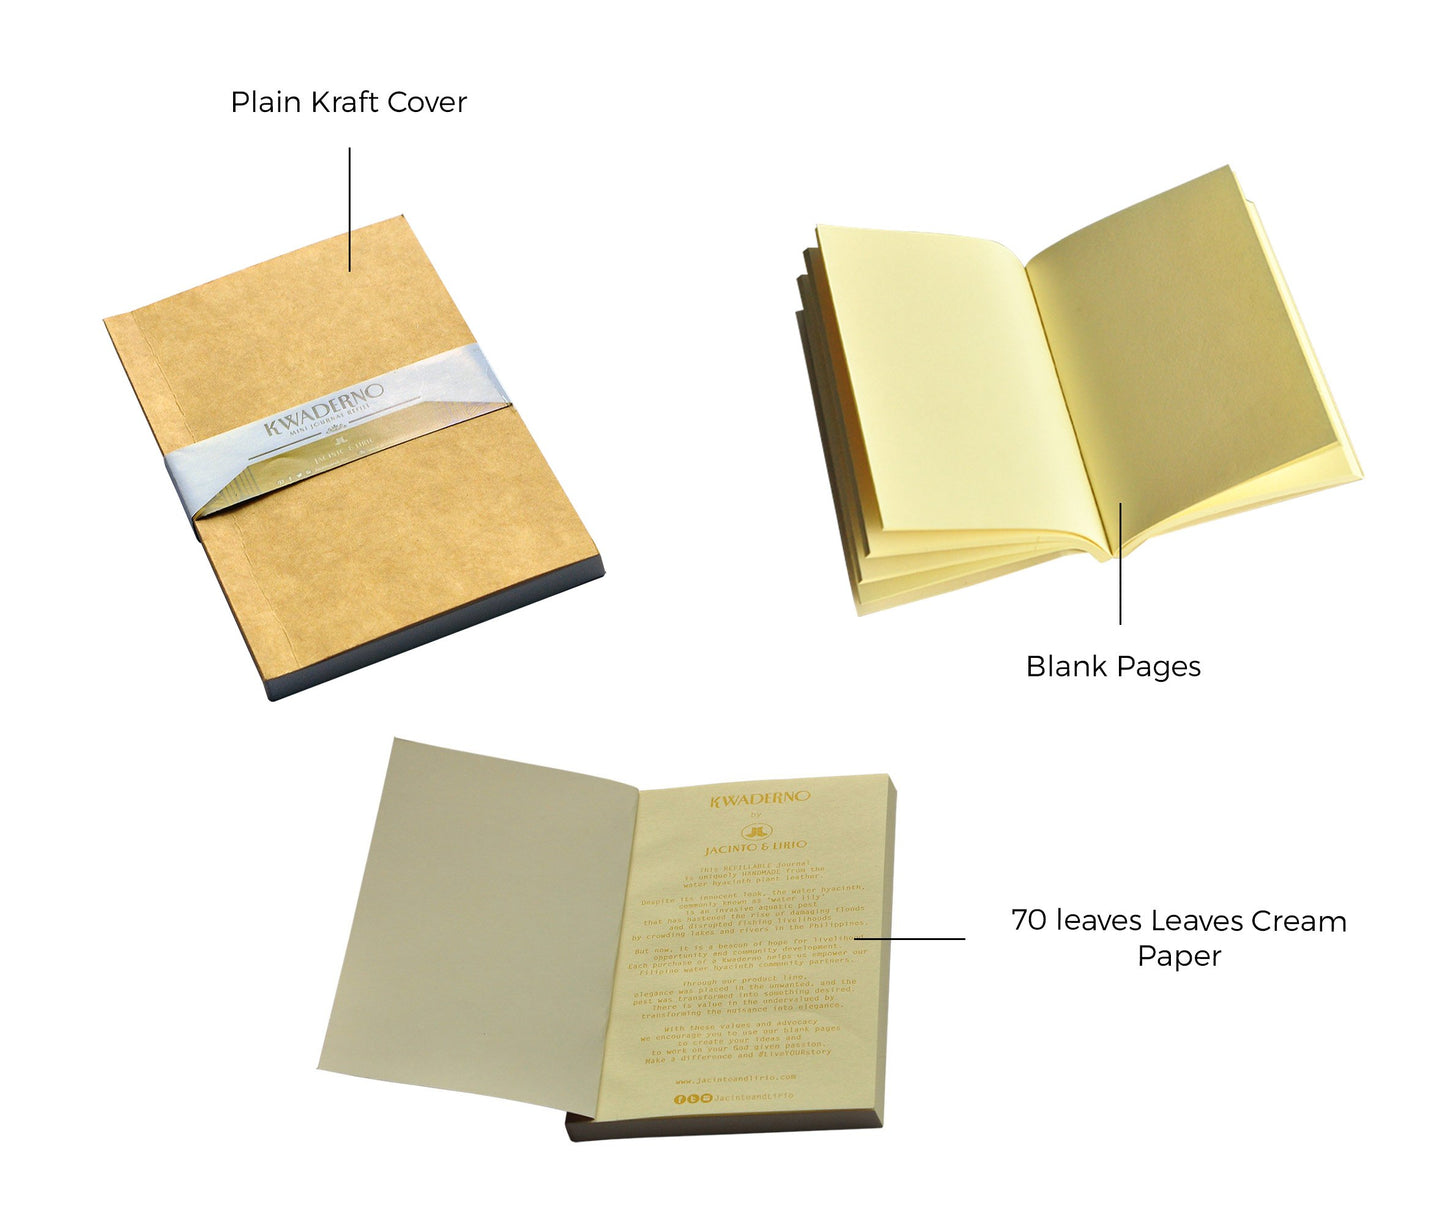 Dual Cover Passport Holder and Refillable Journal (Artisan I)